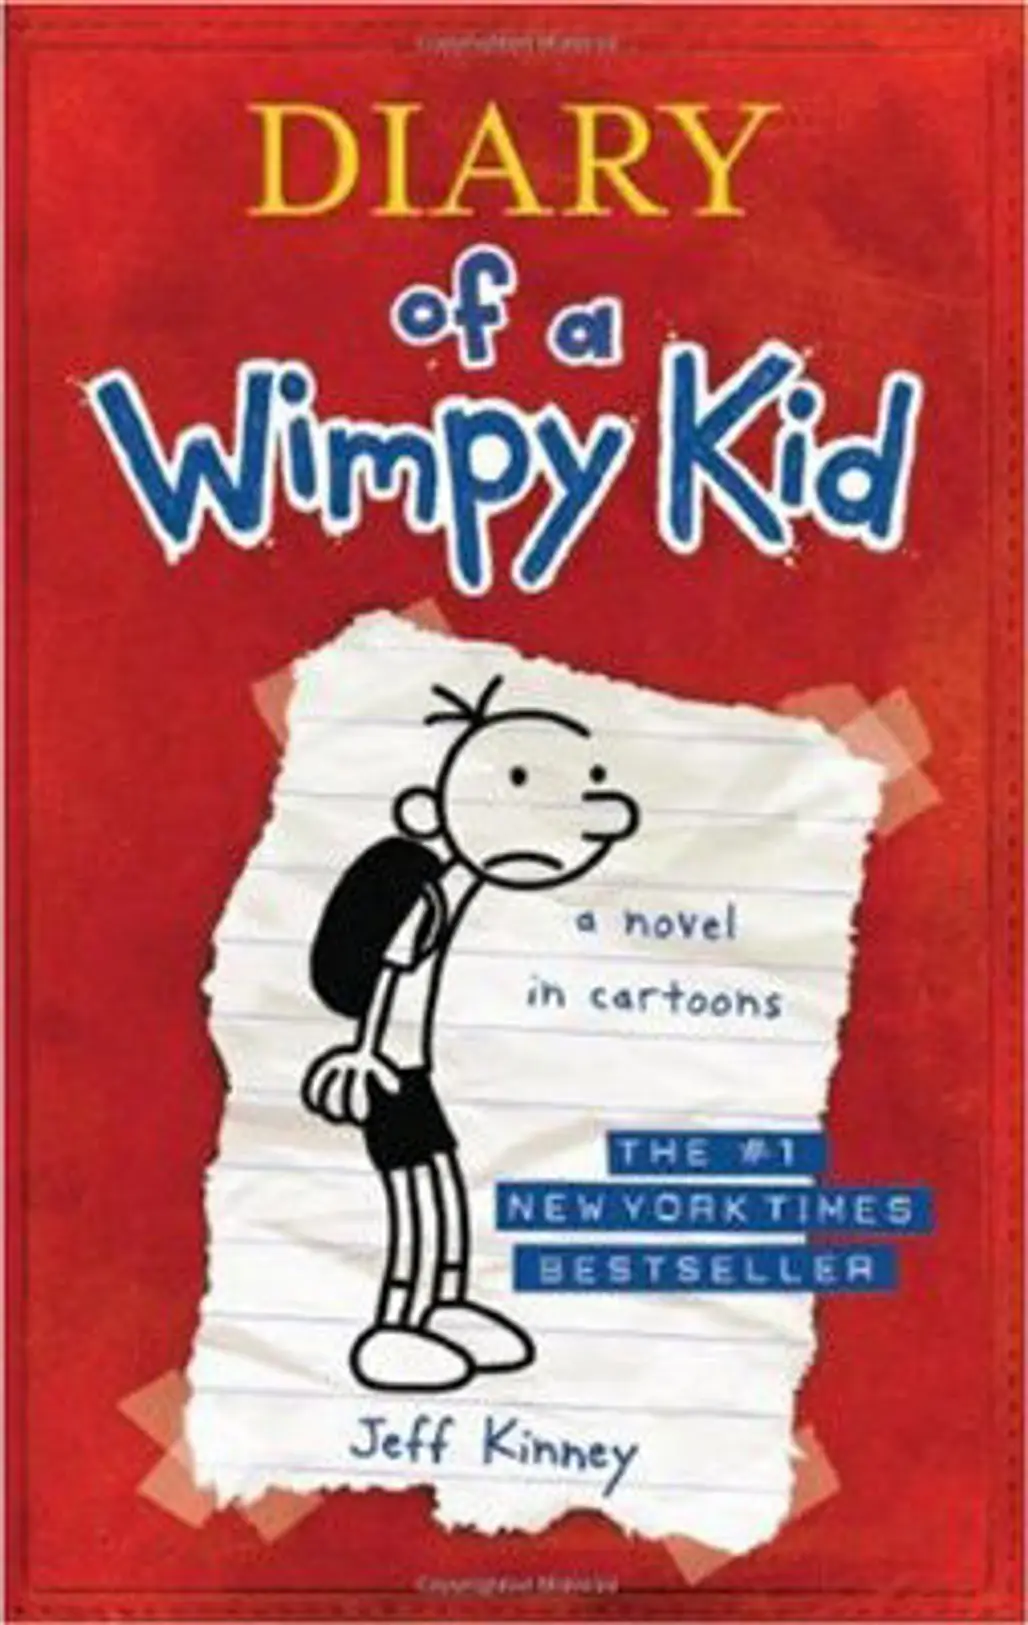 Diary of a Wimpy Kid Series by Jeff Kinney